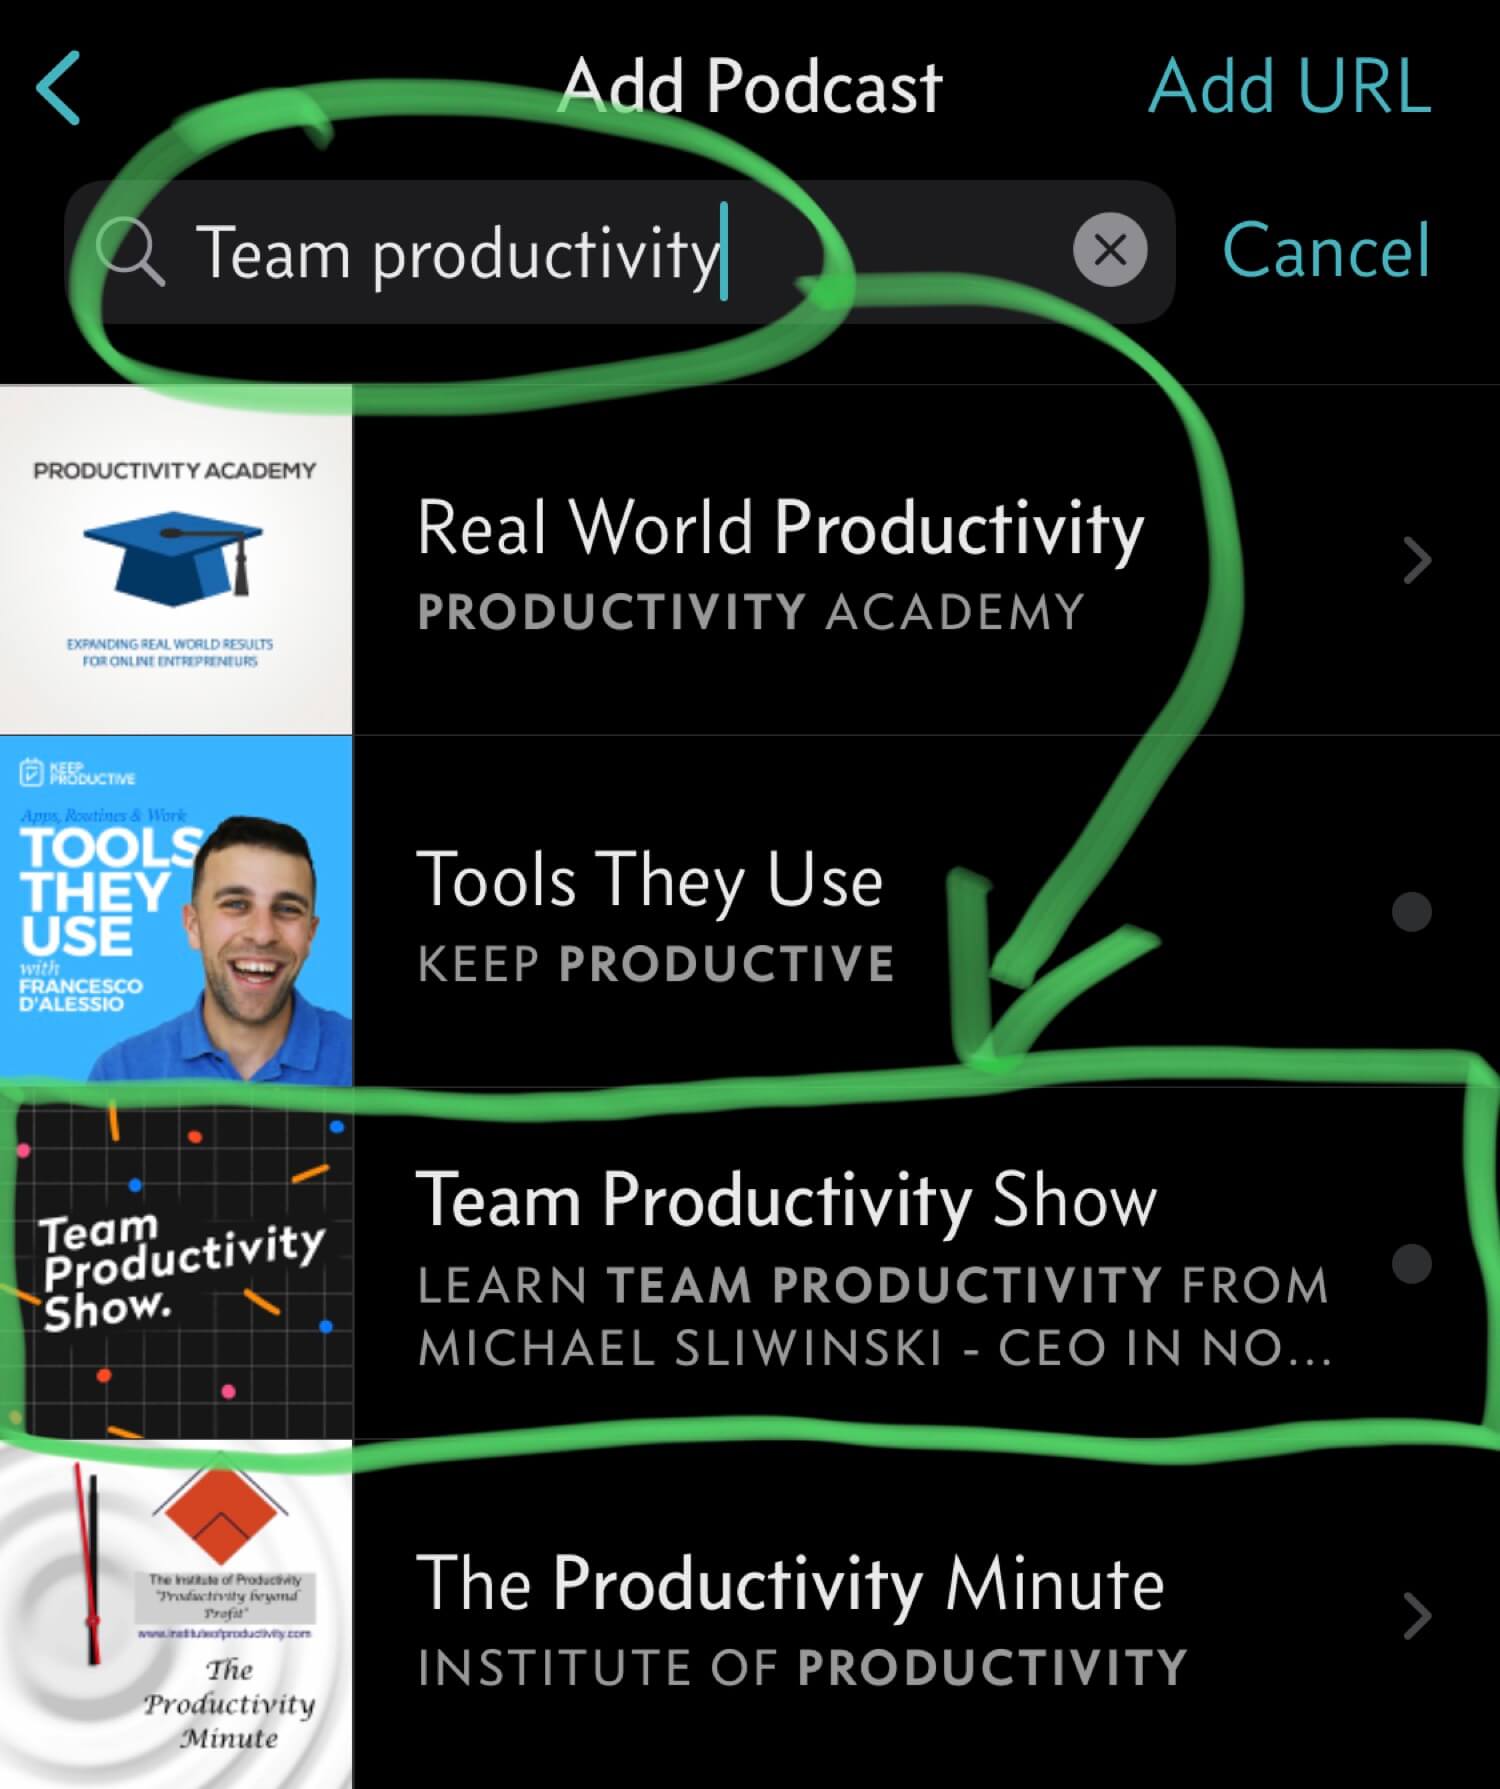 Subscribe to my Team Productivity Show as an audio podcast!